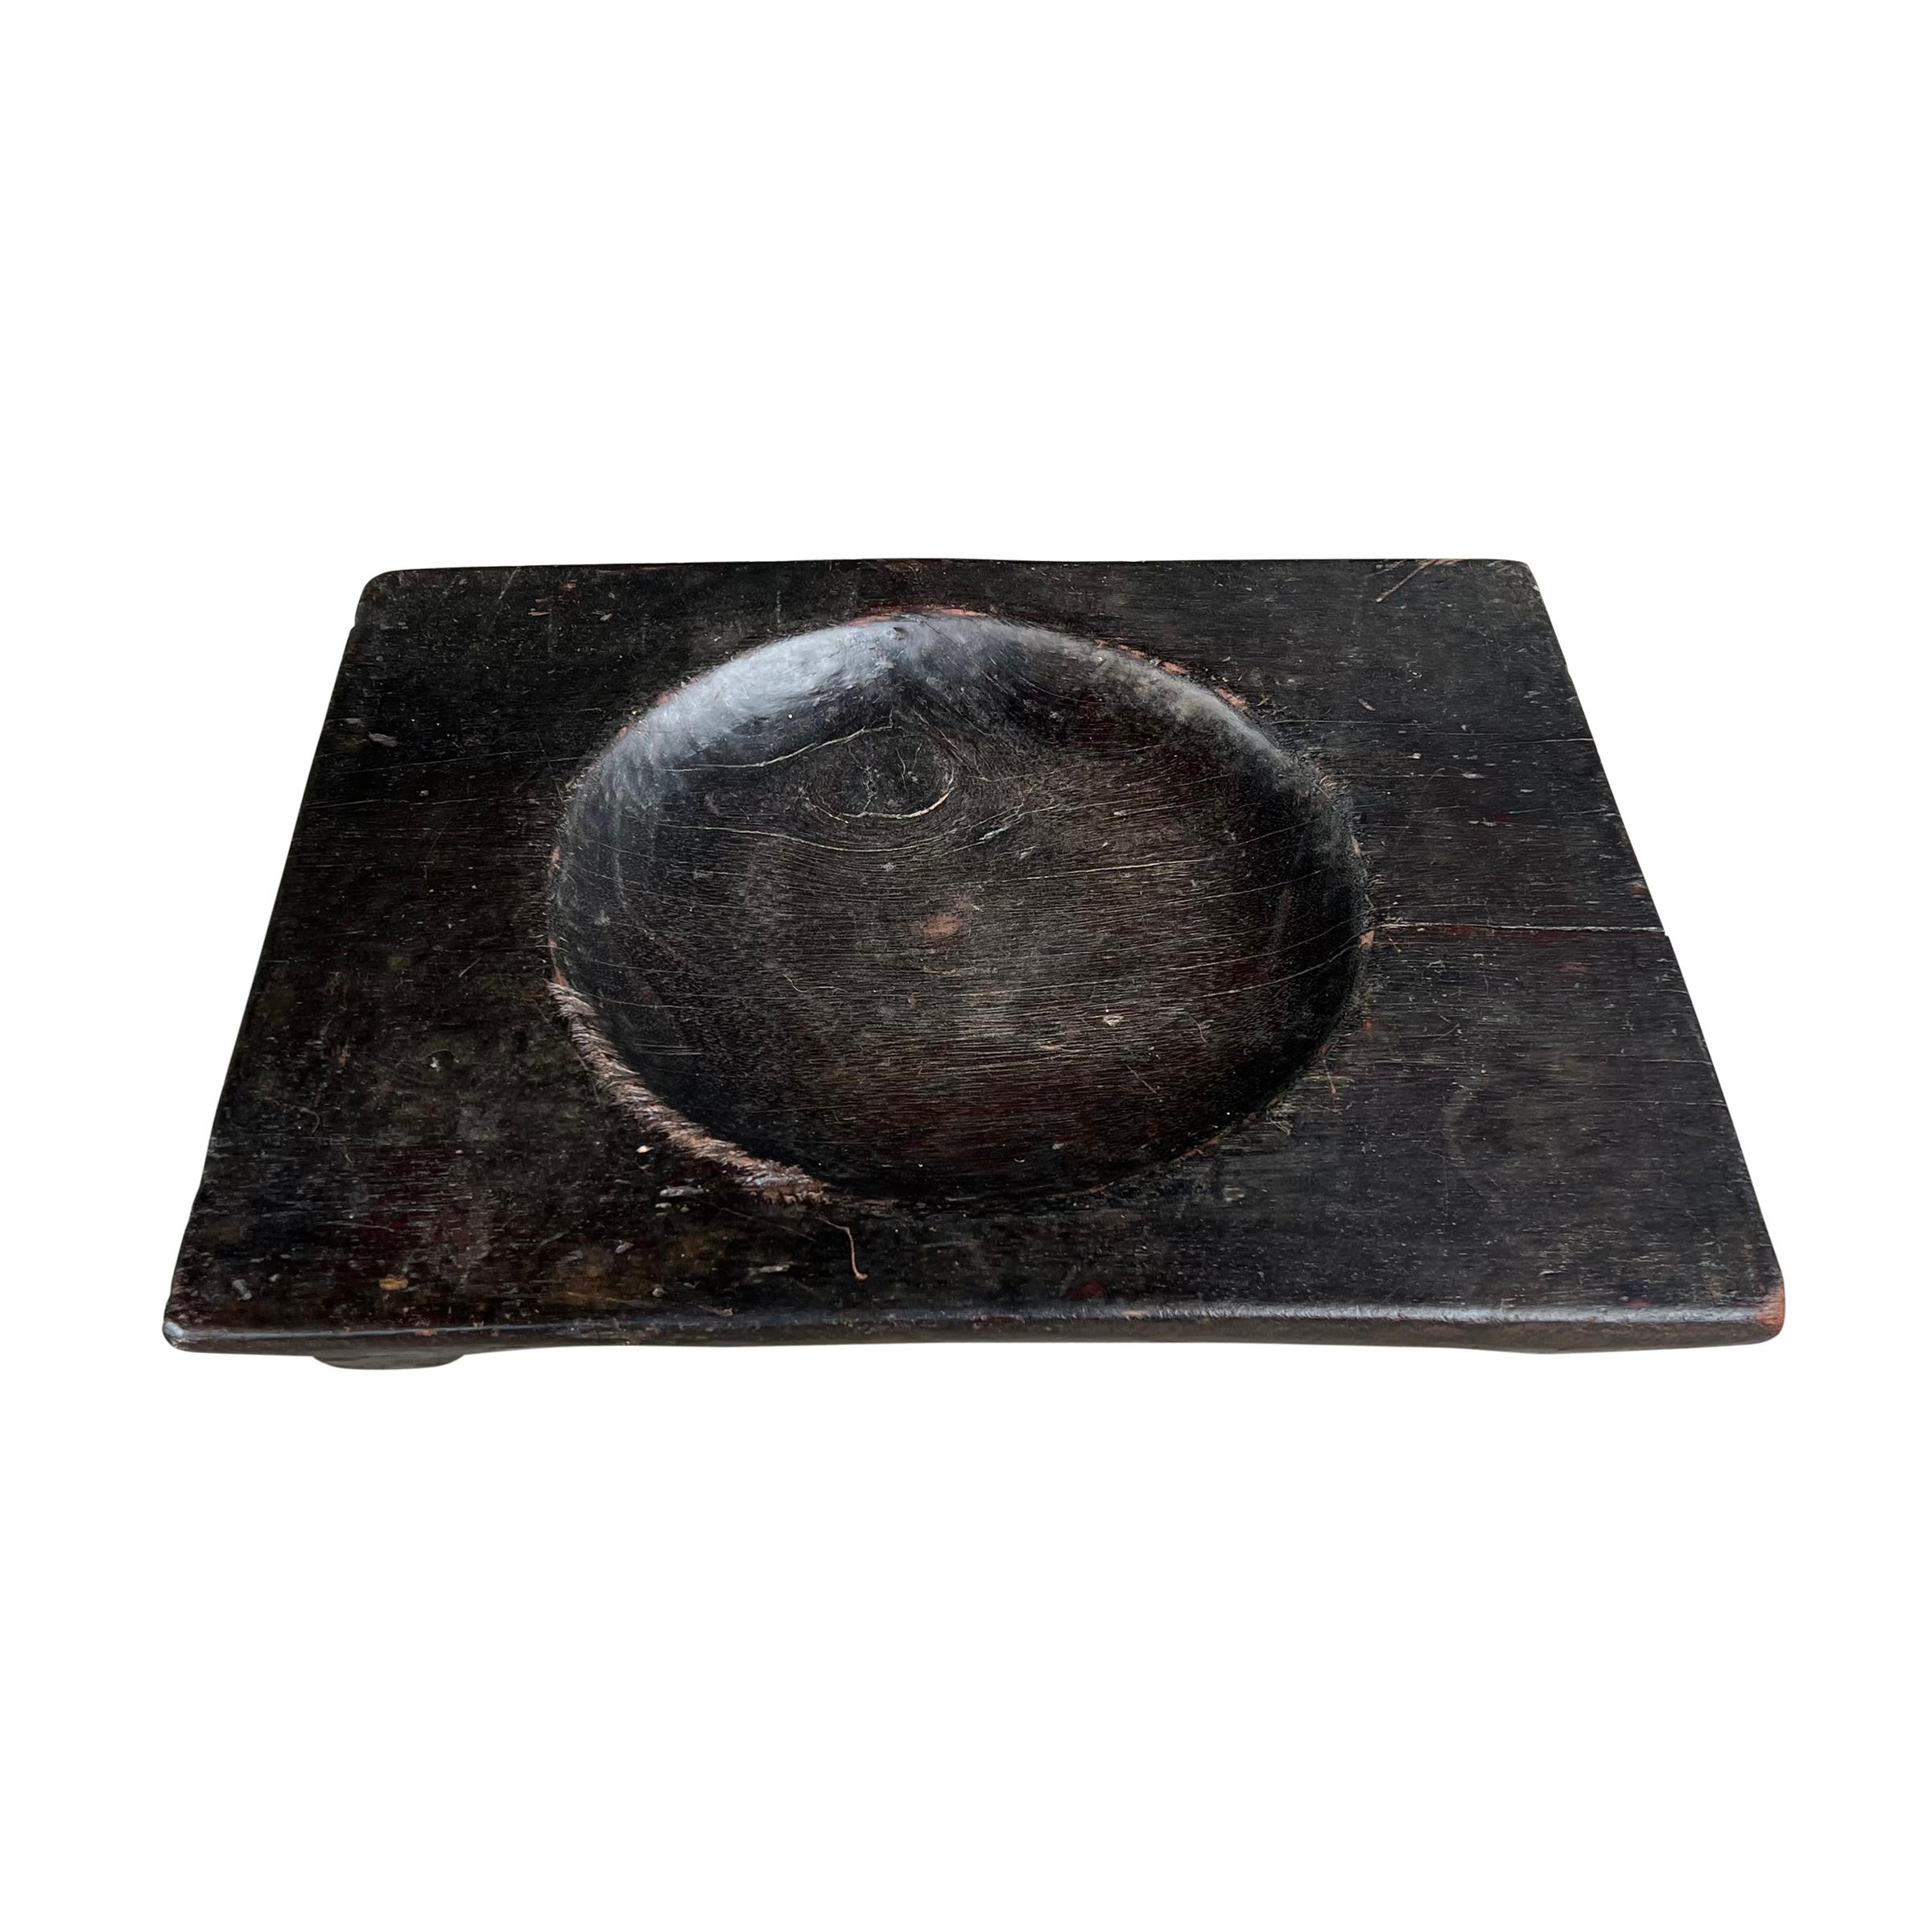 Primitive Early 20th Century Japanese Tray For Sale